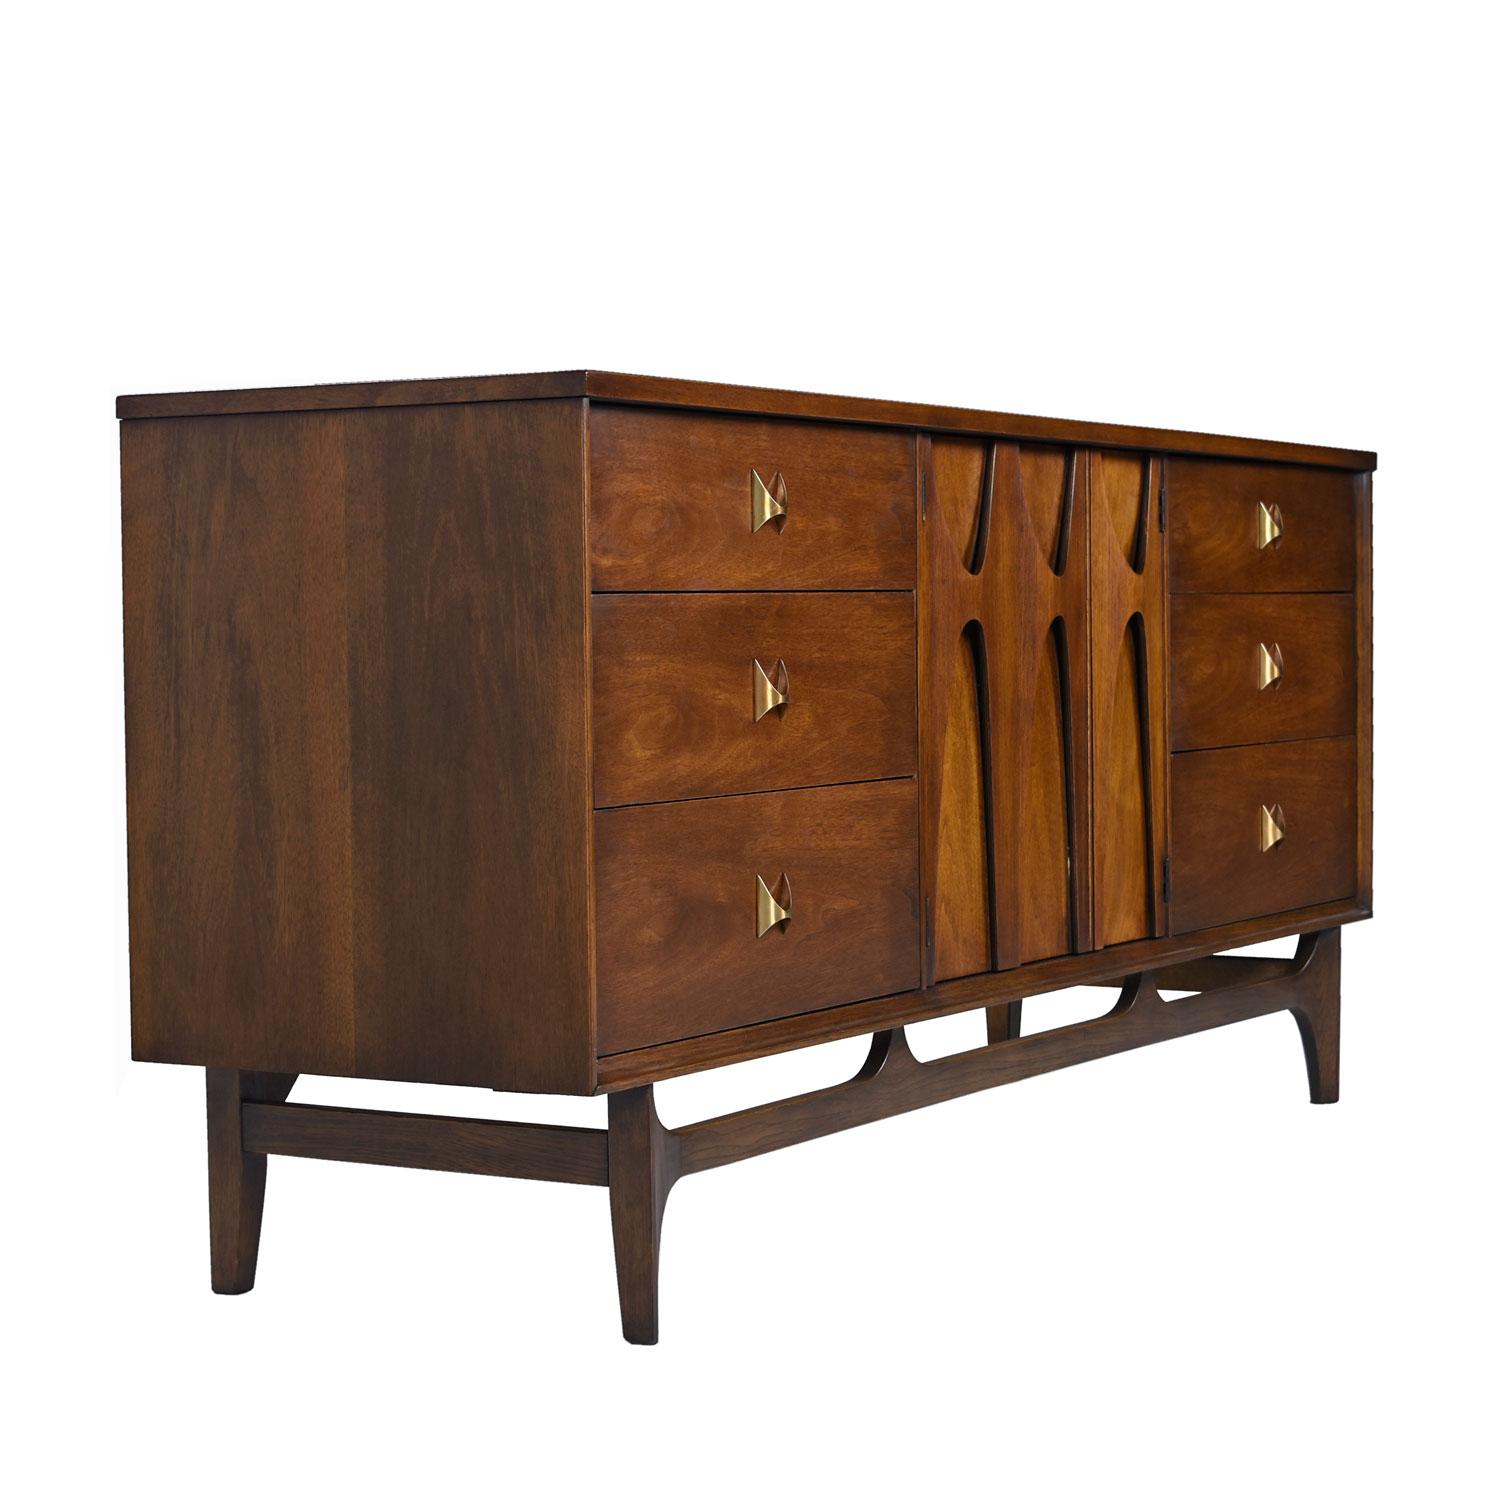 Part of a complete bedroom set, this triple dresser was delicately restored to preserve the original dark patina. We would find this dresser fairly often over the years, but Brasilia has elevated to a high-end status that has made them very sought